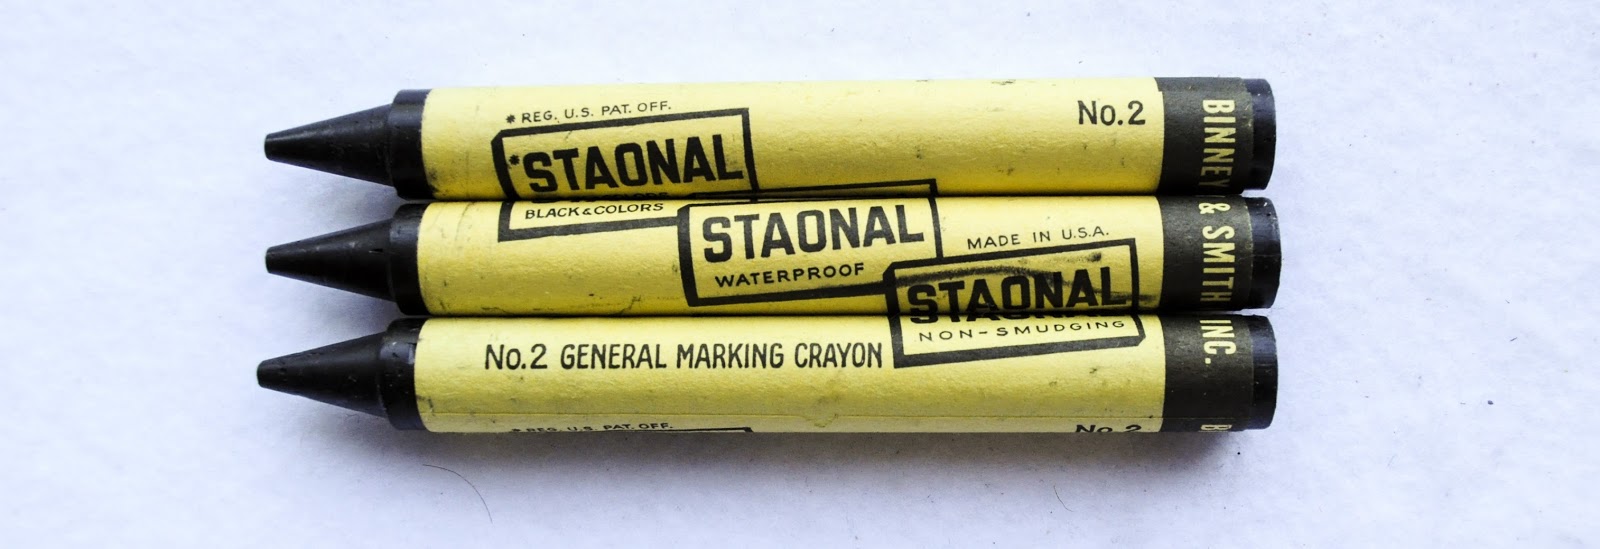 Staonal General Marking Crayon: What's Inside the Box